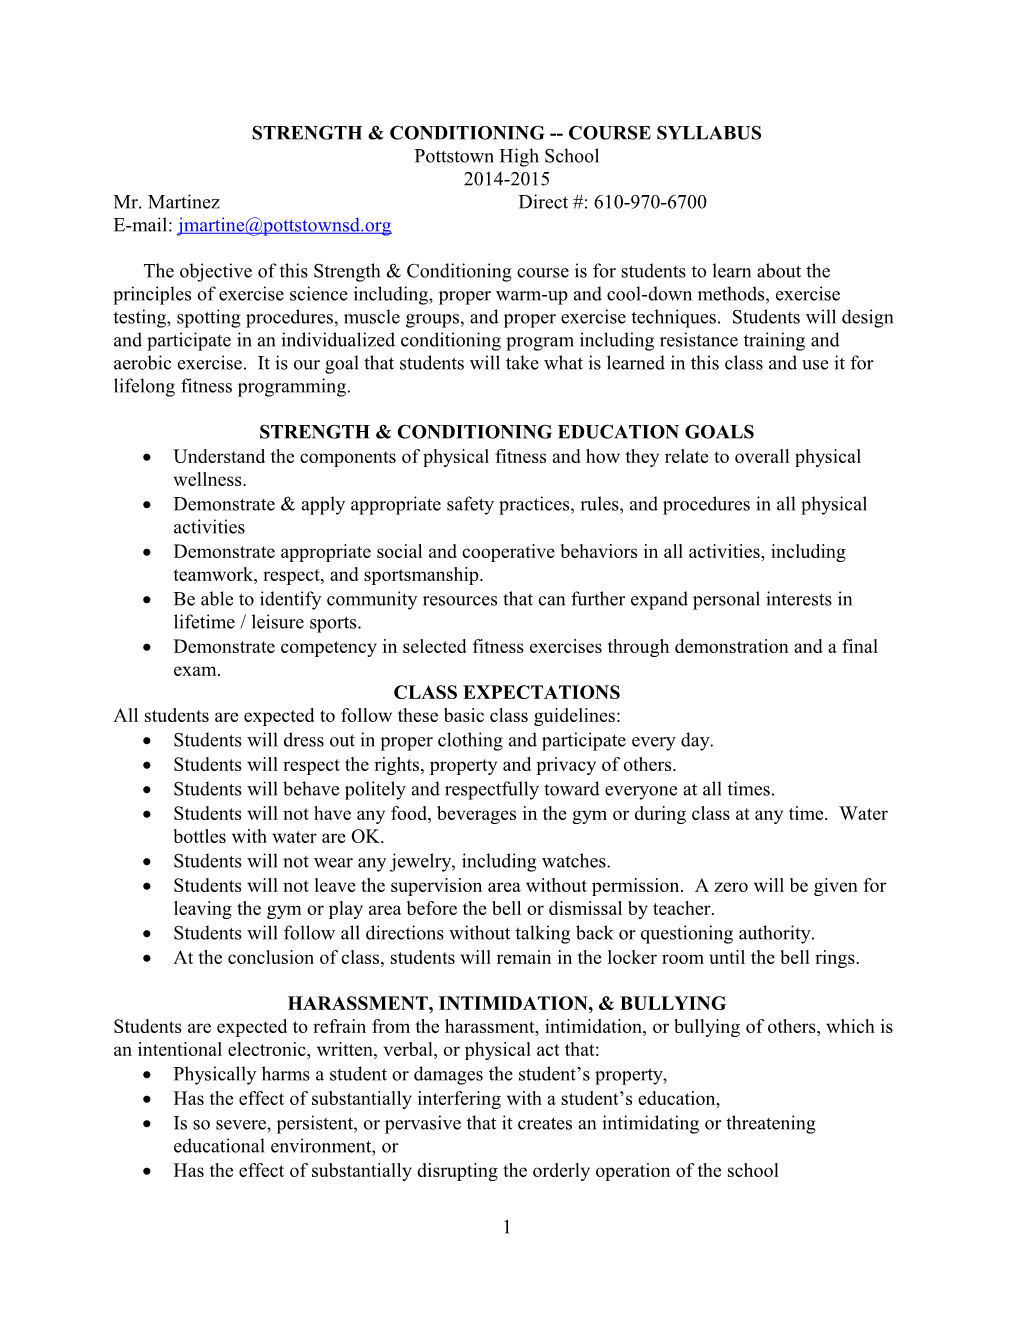 Strength & Conditioning Course Syllabus